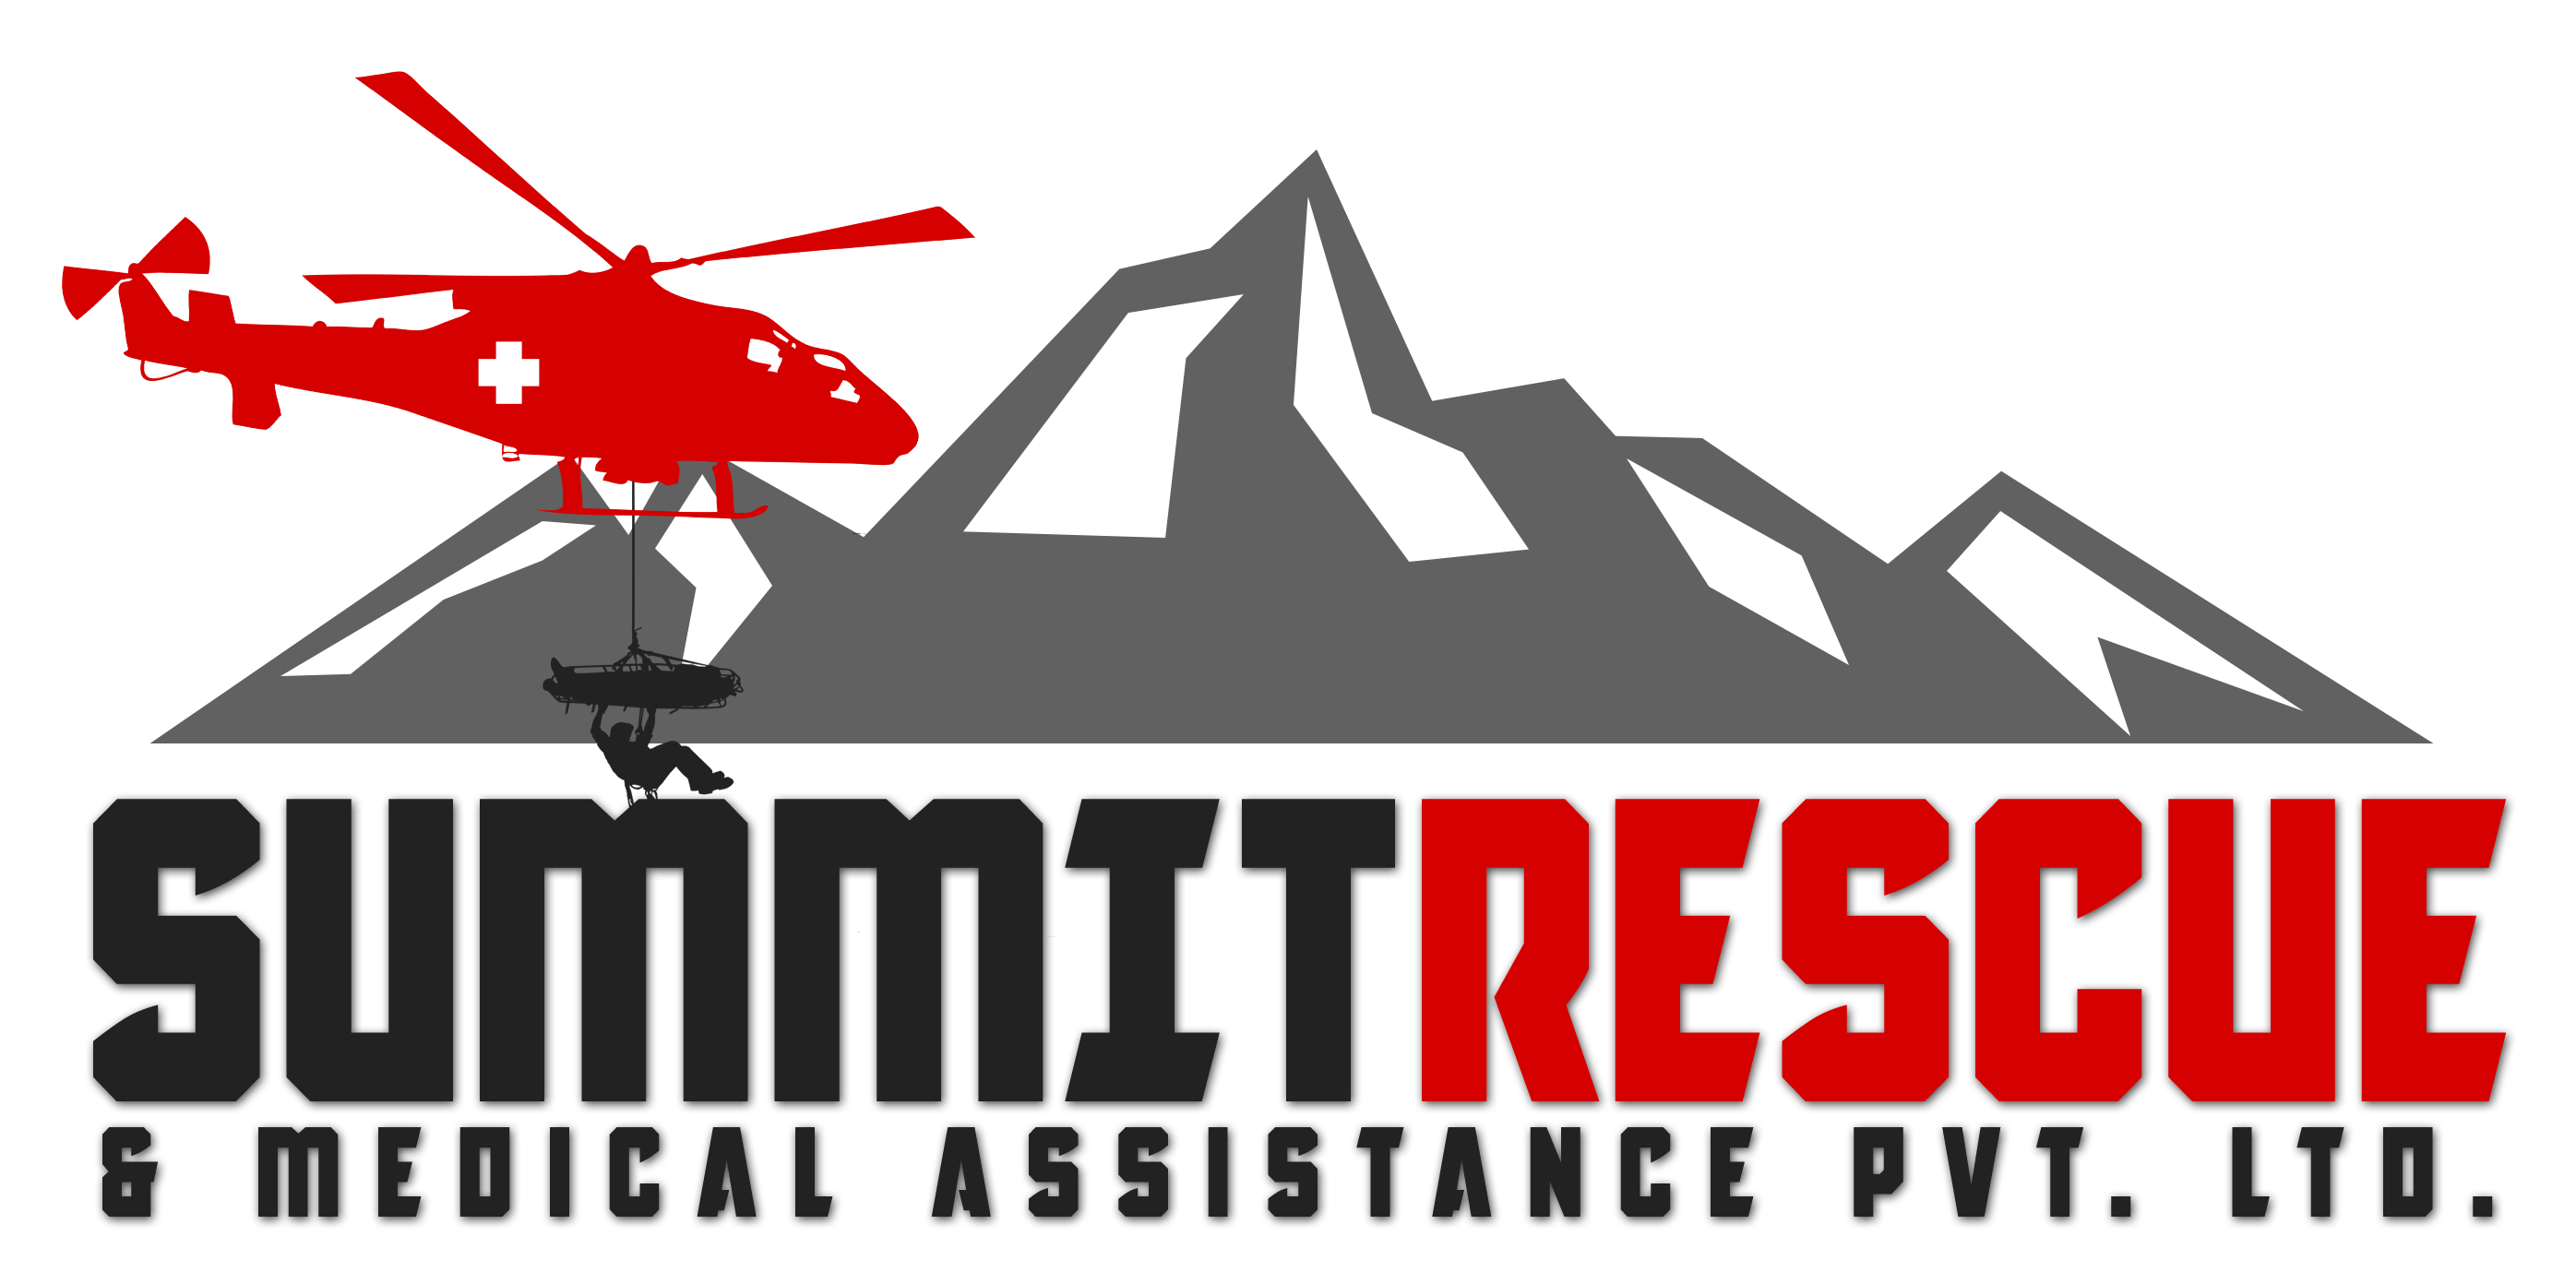 helicopter clipart mountain rescue